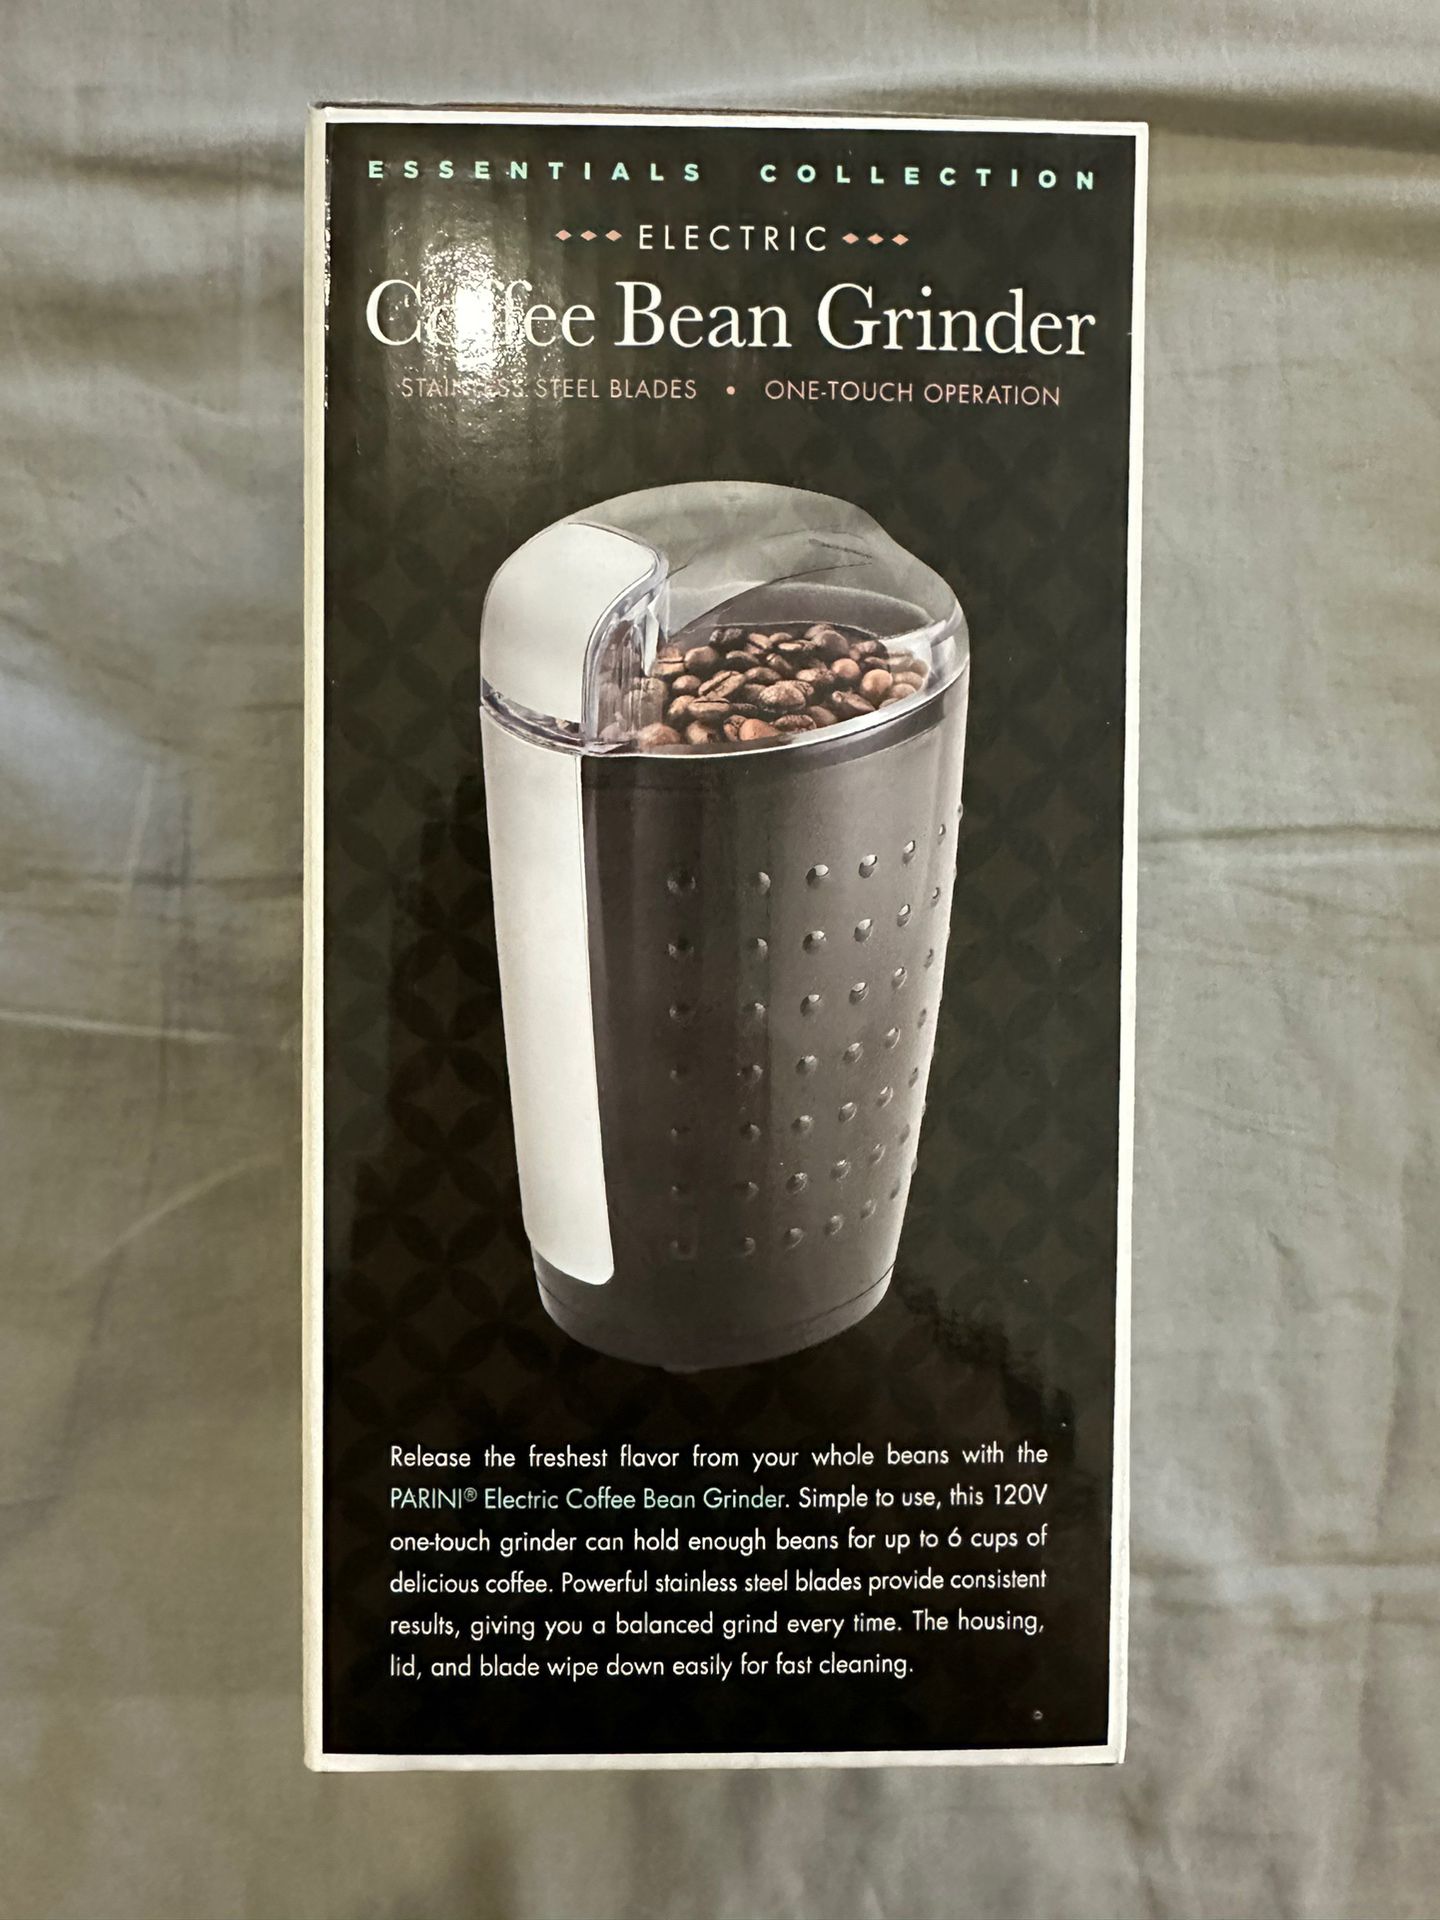 Krups Coffee Bean Grinder for Sale in Beverly Hills, CA - OfferUp